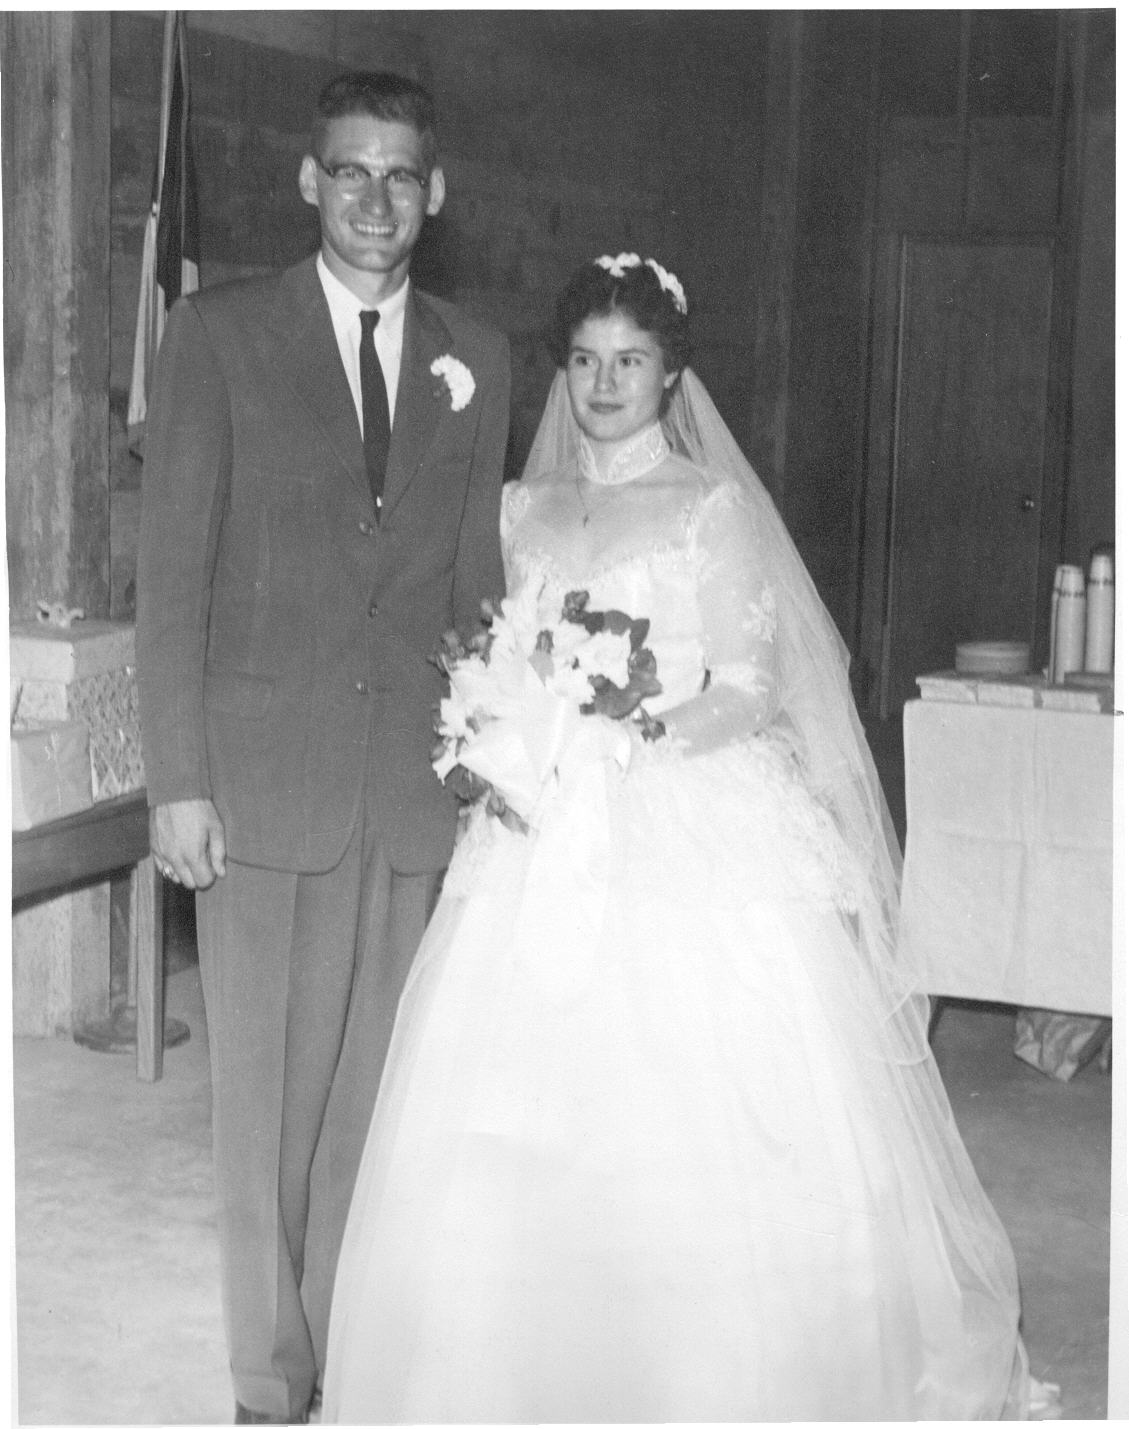 Don & Colleen Kauble 1955